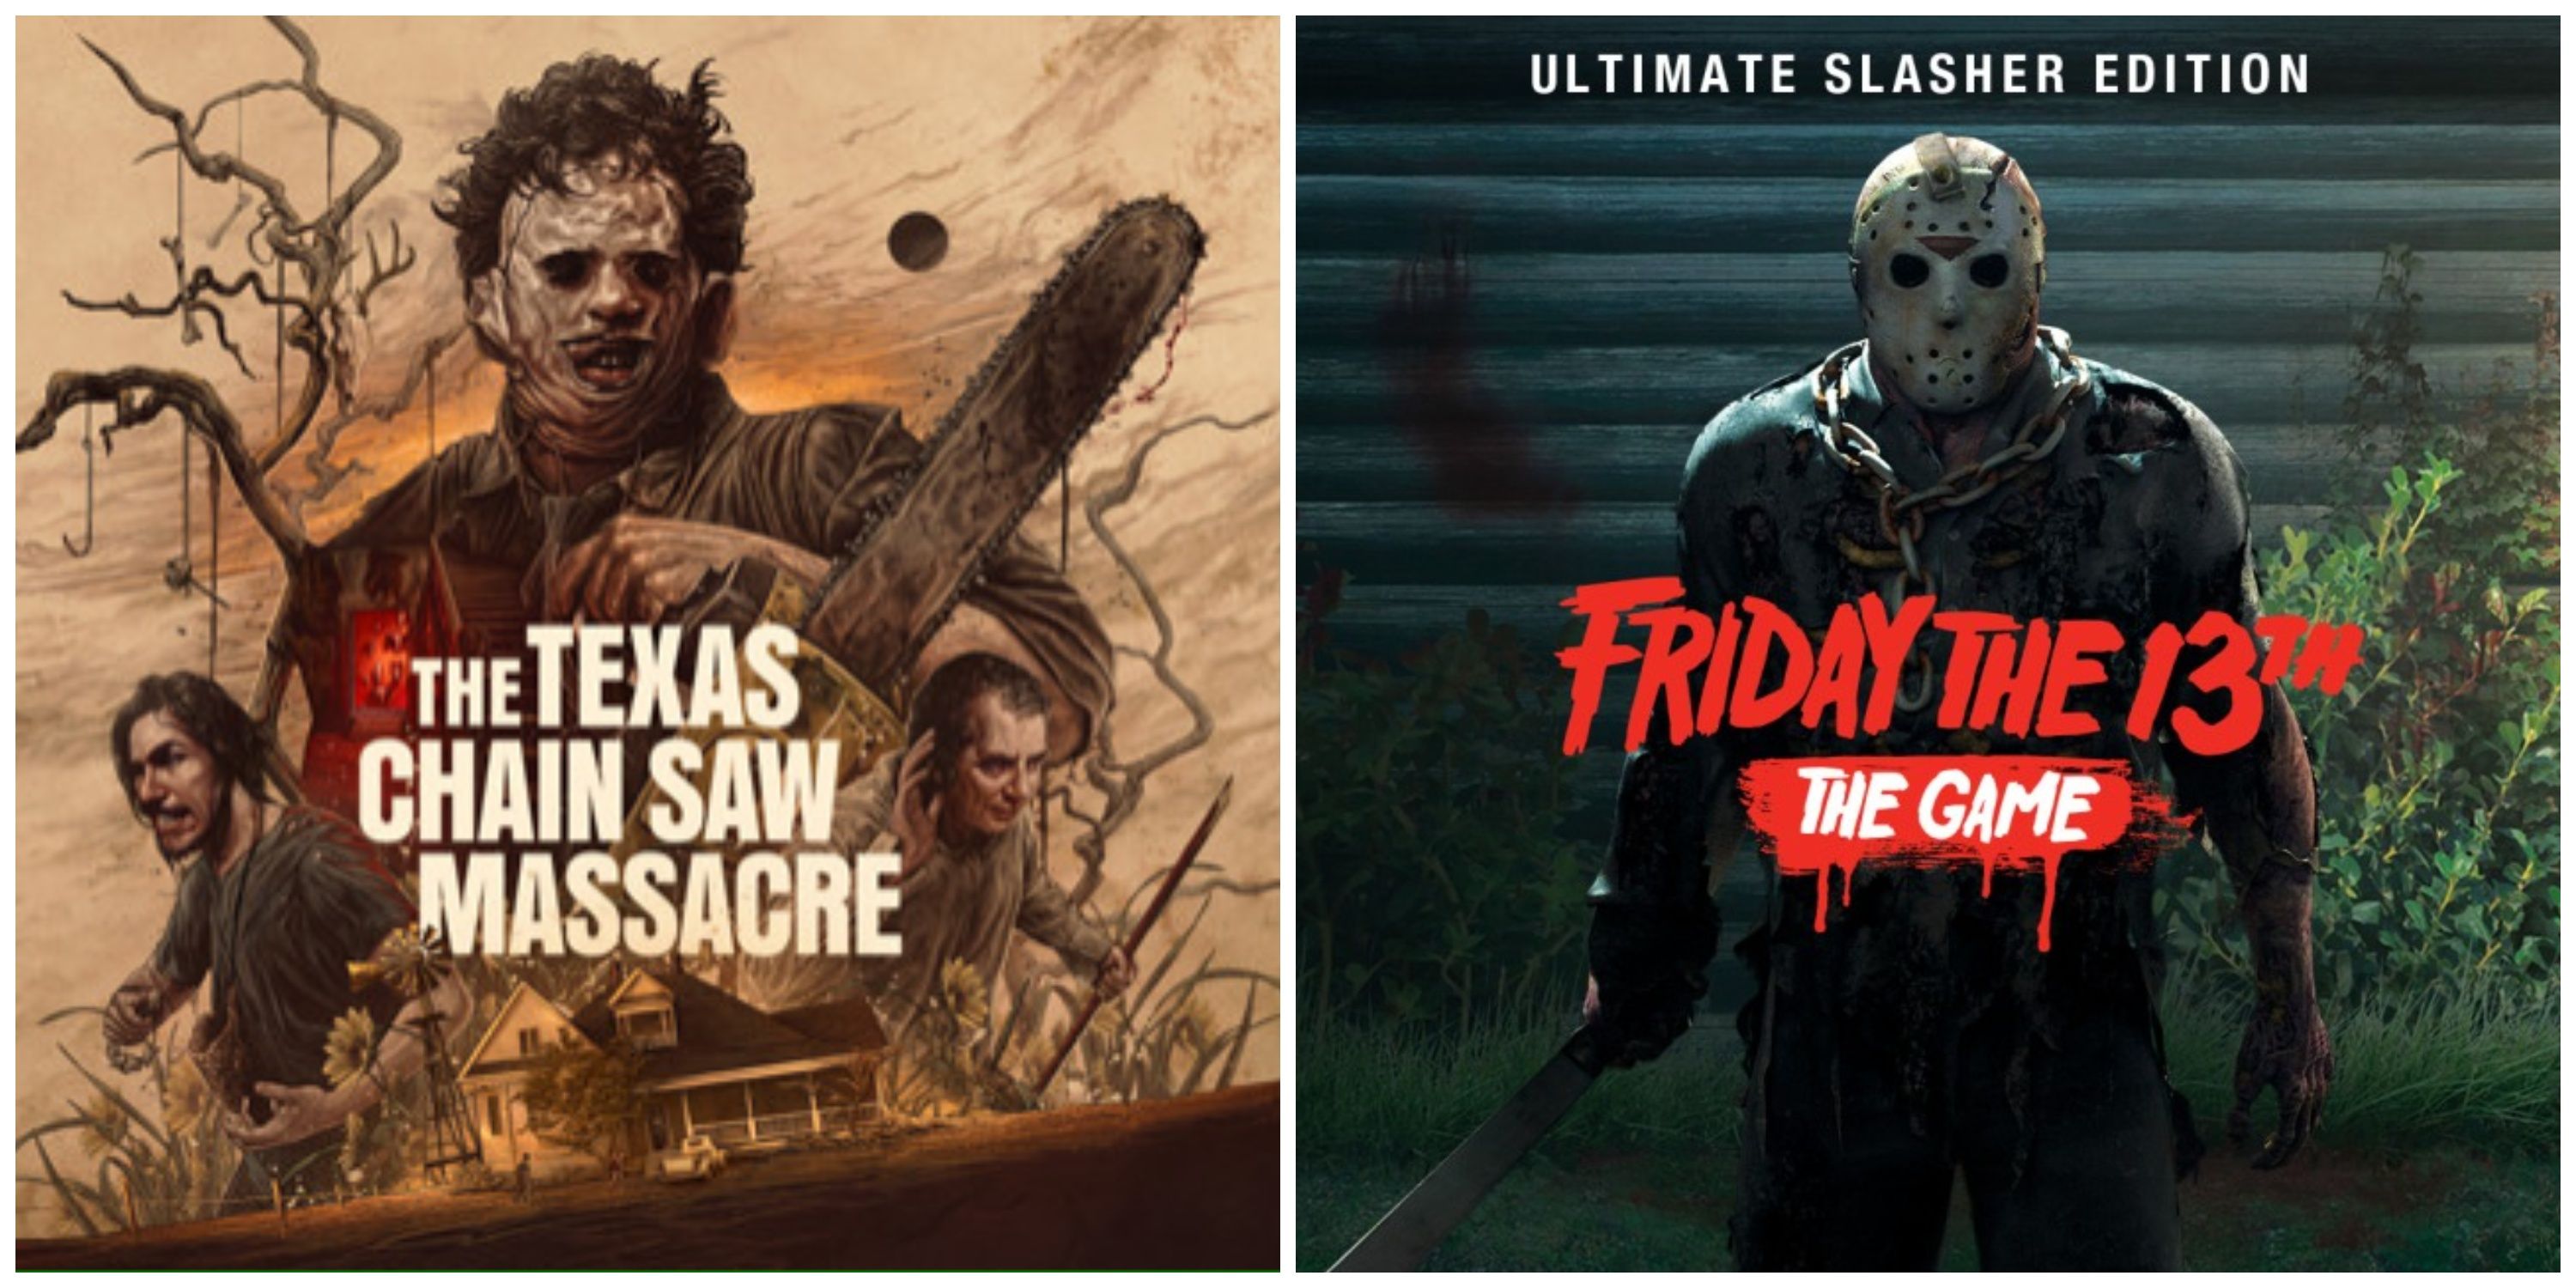 Dead By Daylight Vs Friday The 13th: Which Slasher Game Is Better?